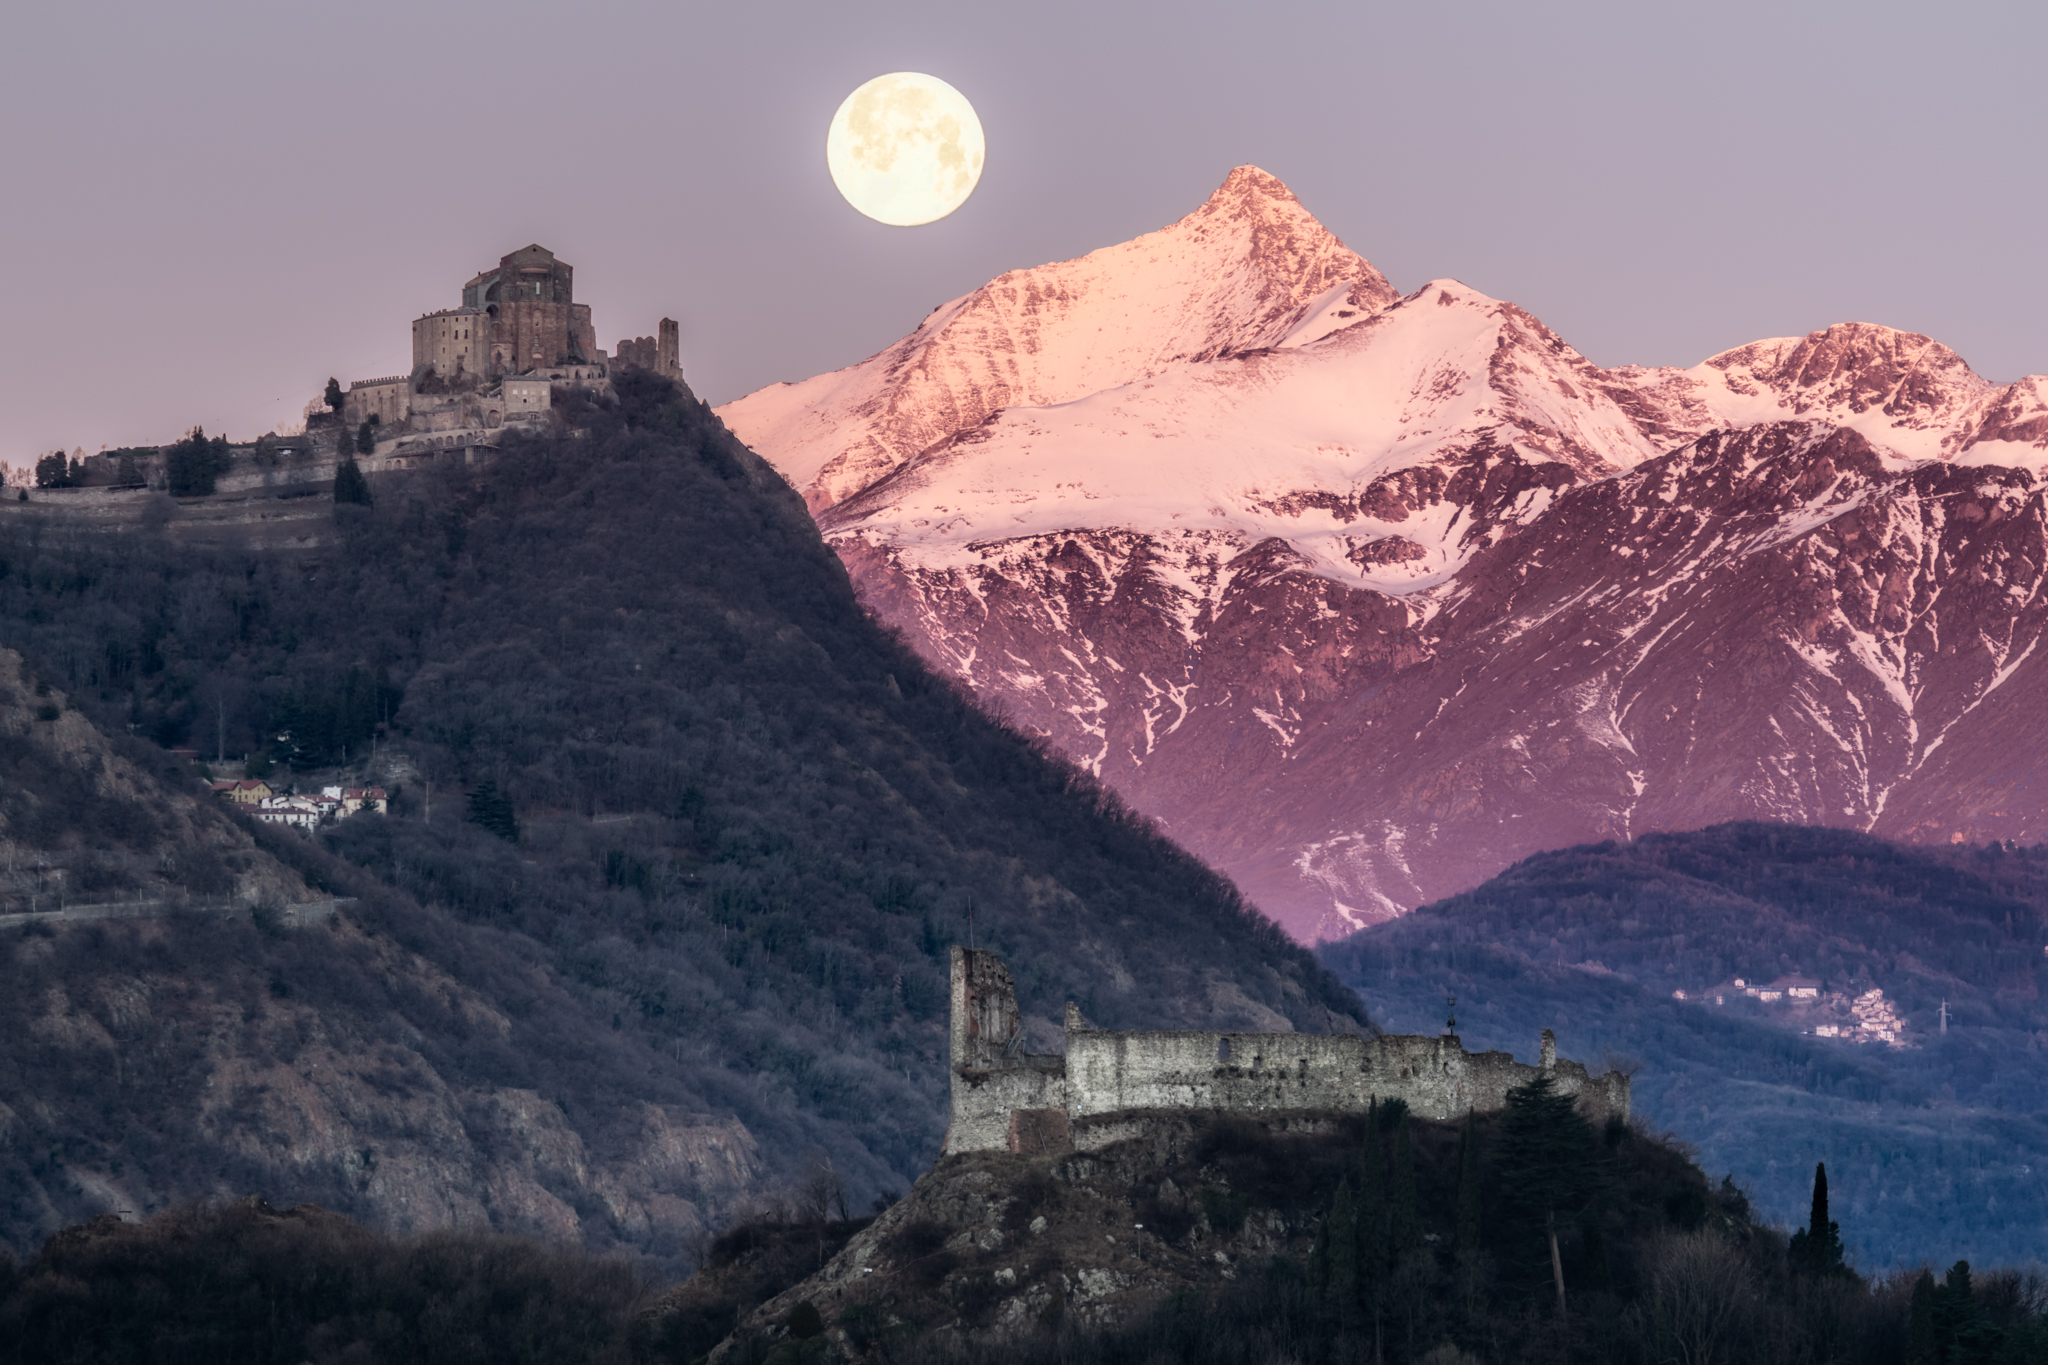 The Castle, the Sacra, the Rocciamelone... and the Moon!...